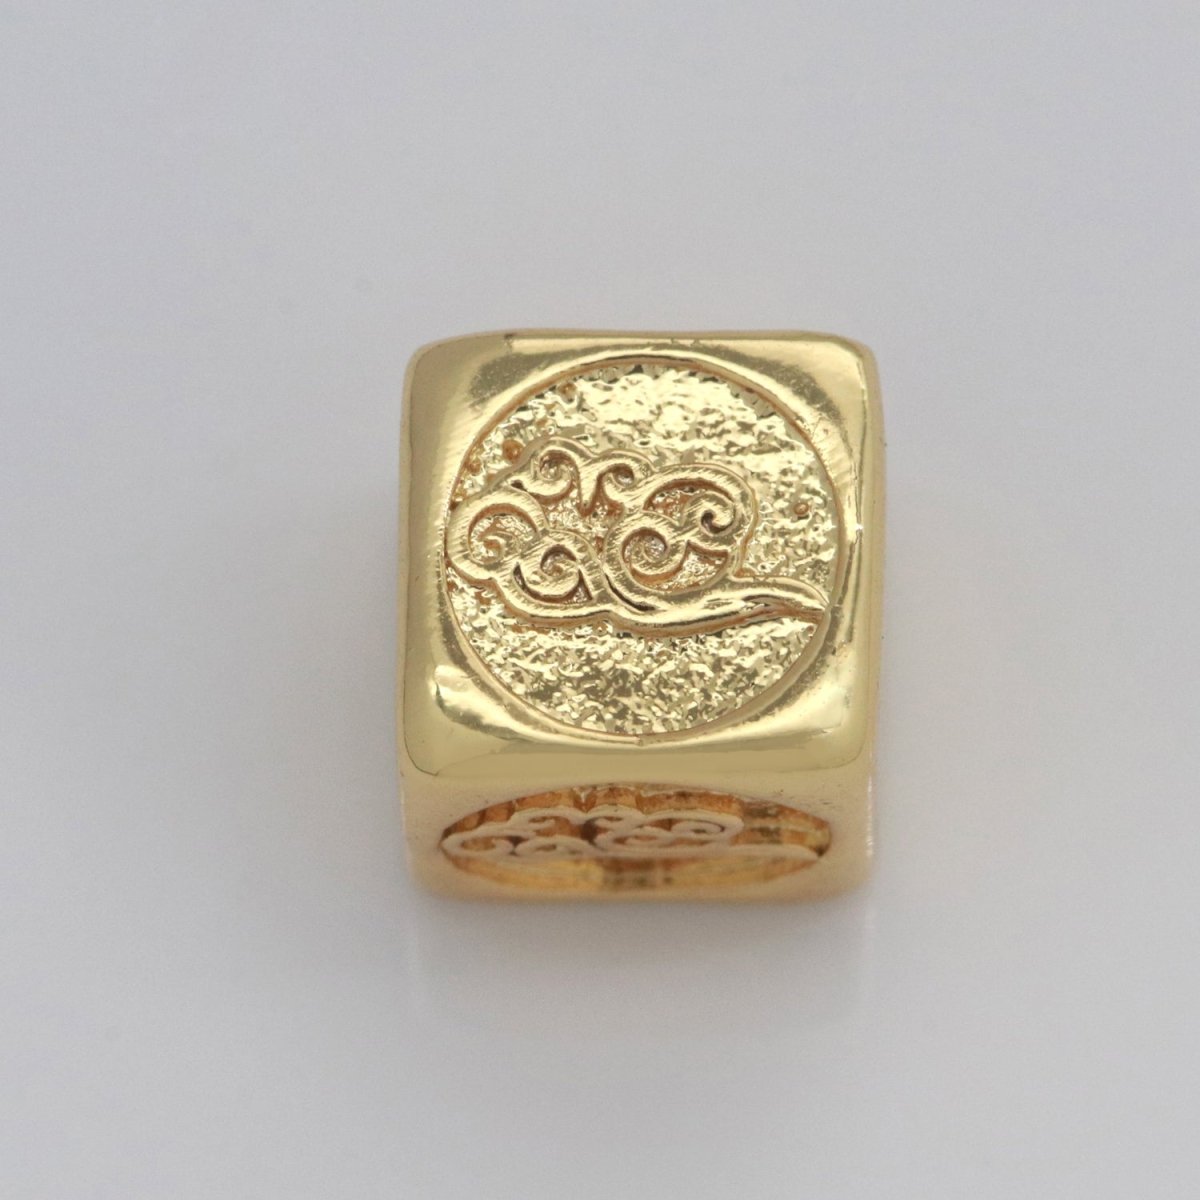 Element Bead Collection Gold Element Charm Fire Wind Earth Ocean Wave Bead Spacer 14K Gold Filled Cube Beads for Bracelet Supply B-637 to B-640 - DLUXCA